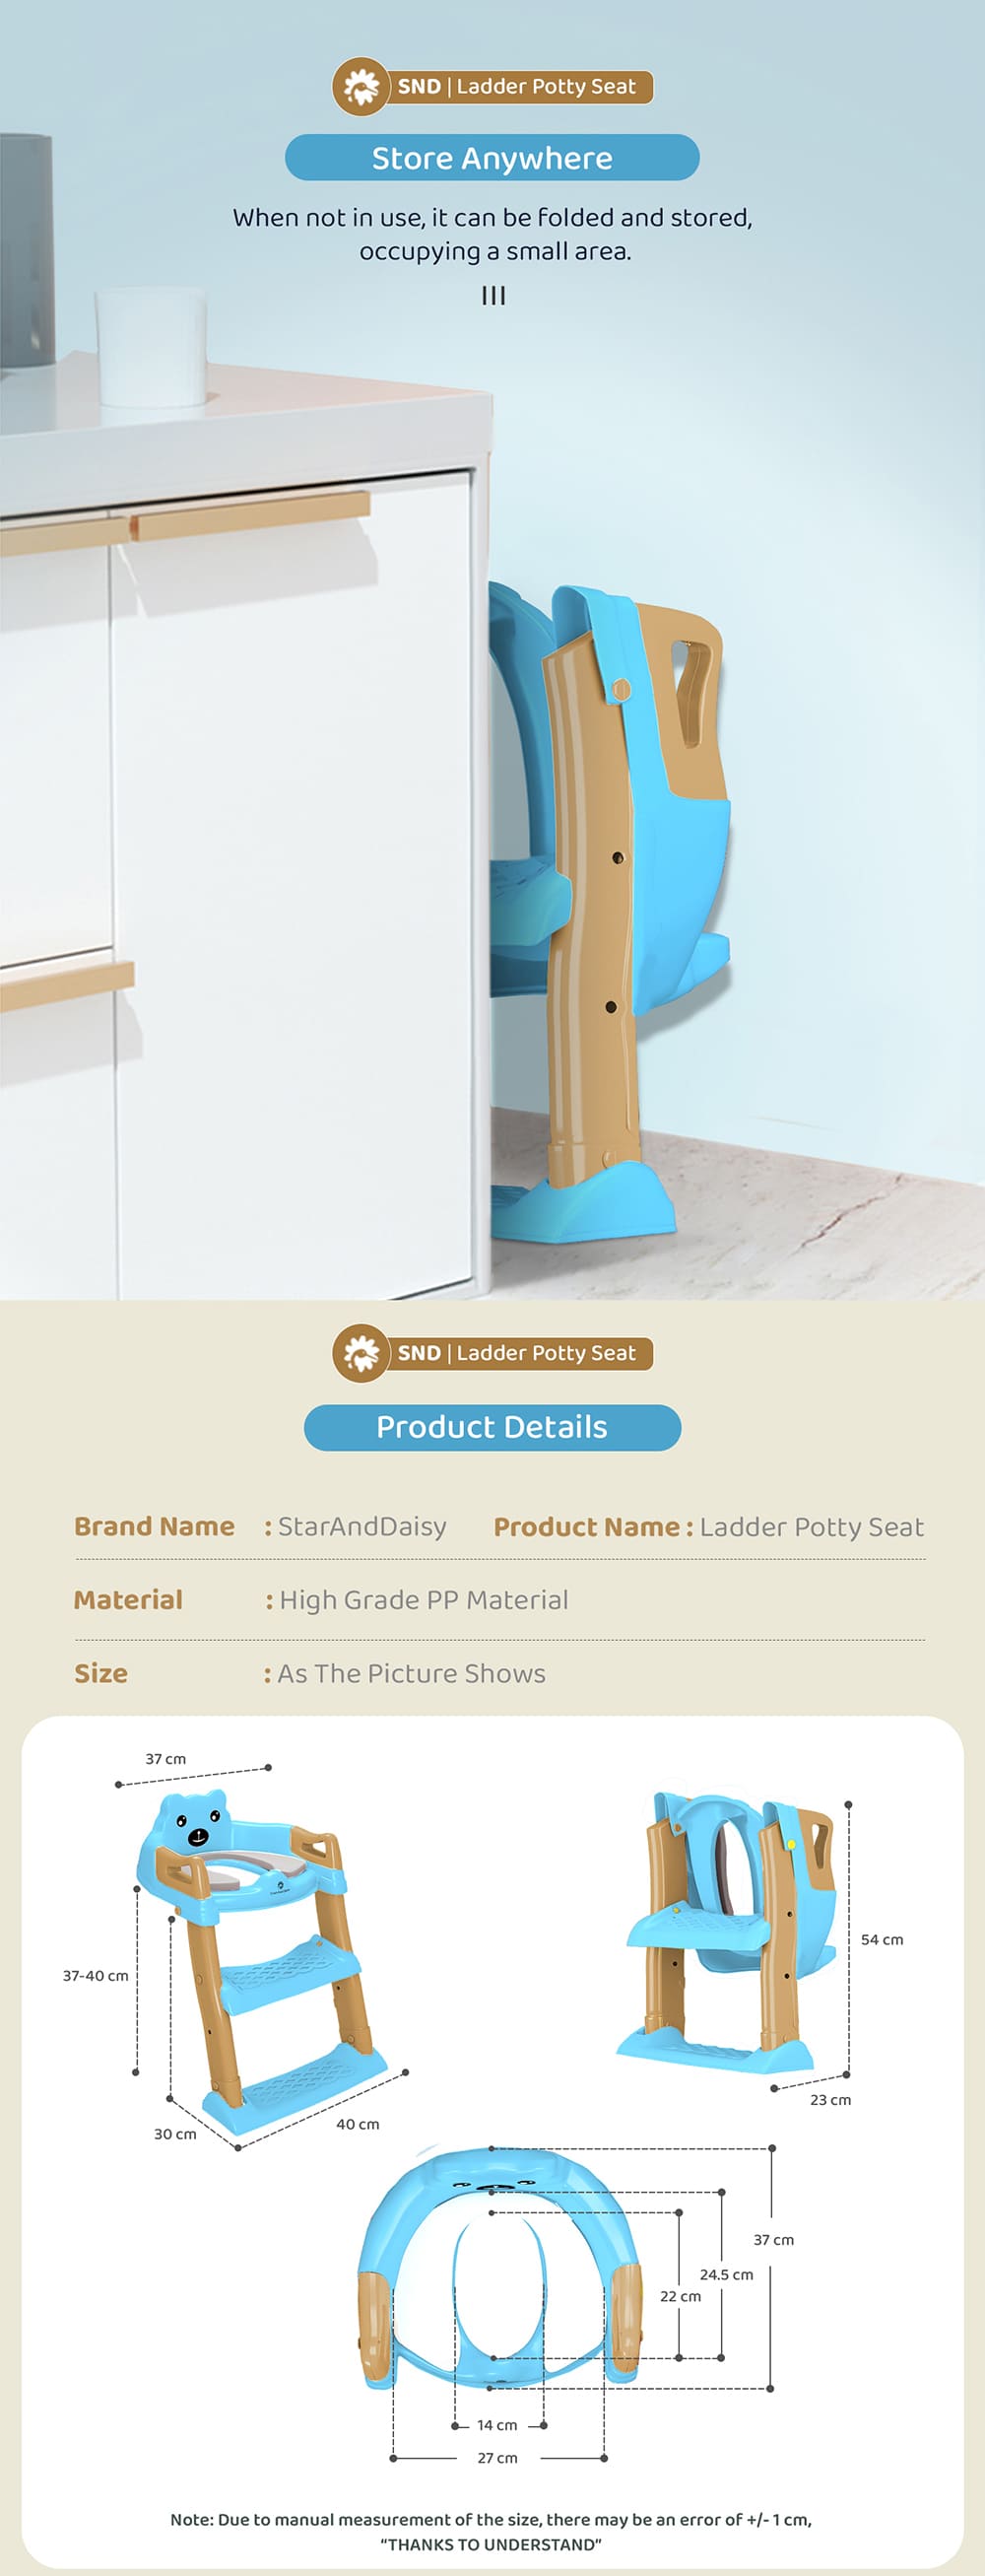 Product Specification of Ladder Potty Seat